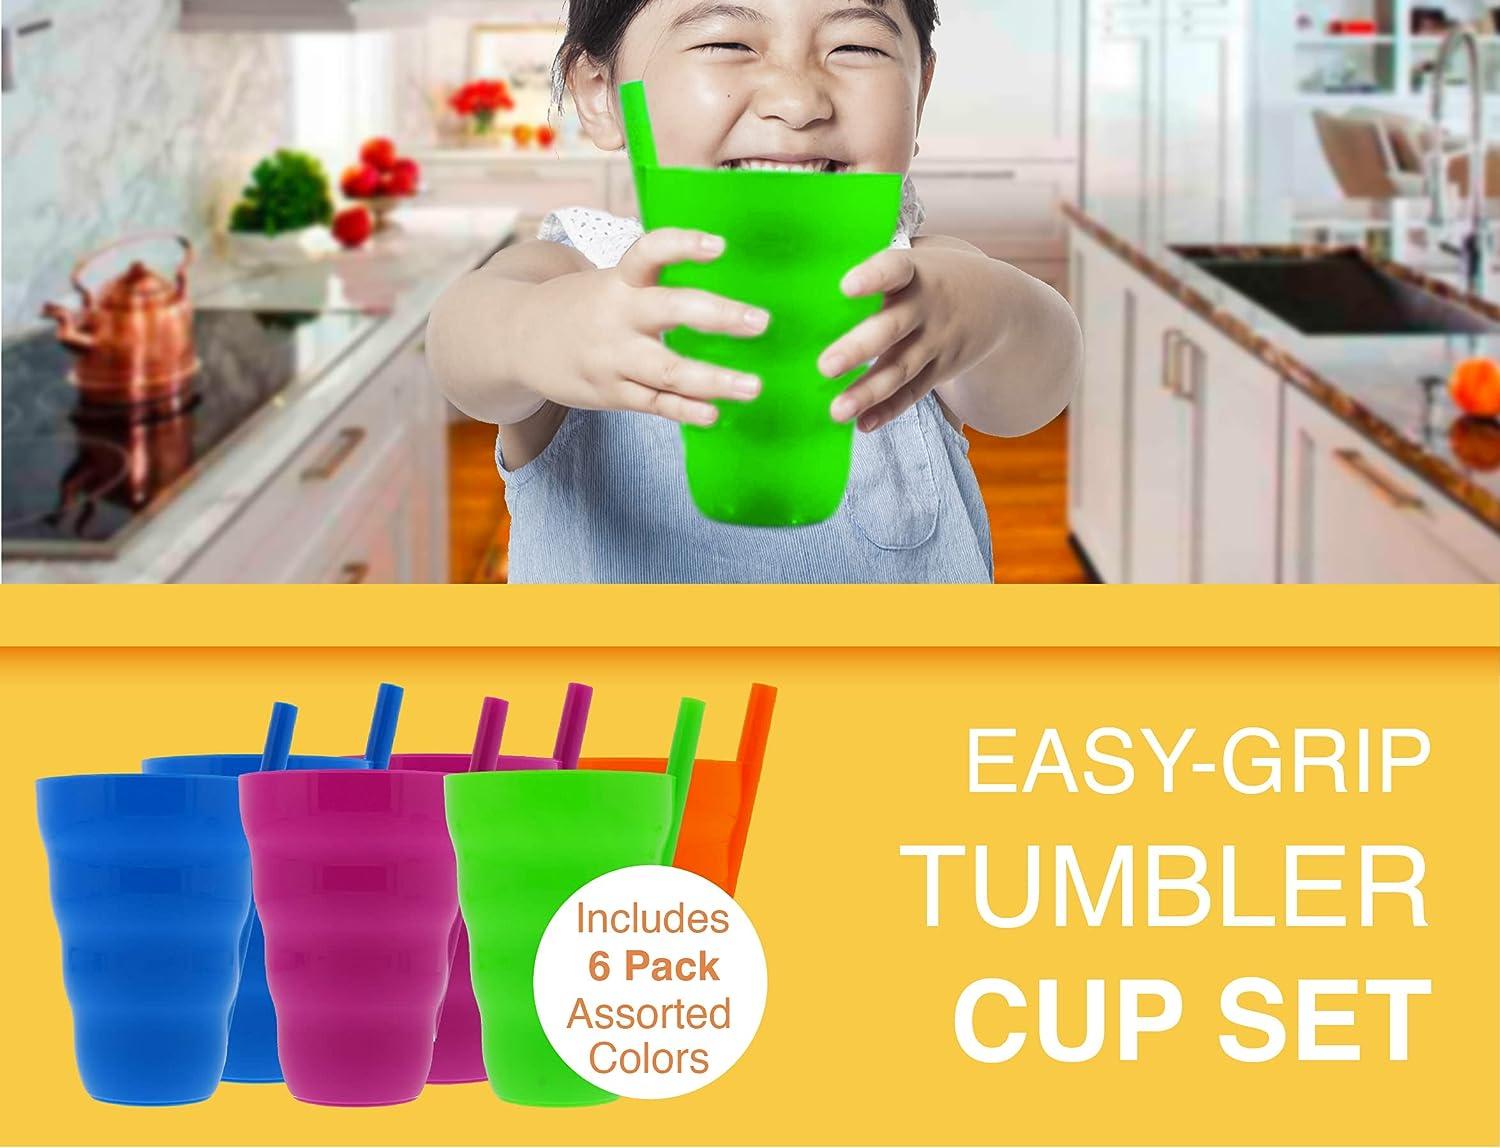 Arrow 10oz Sip A Cup with Built in Straw, 6pk - Straw Cups for Toddlers, Kids Cup with Straw, Plastic Toddler Straw Cup - BPA Free, Dishwasher Safe